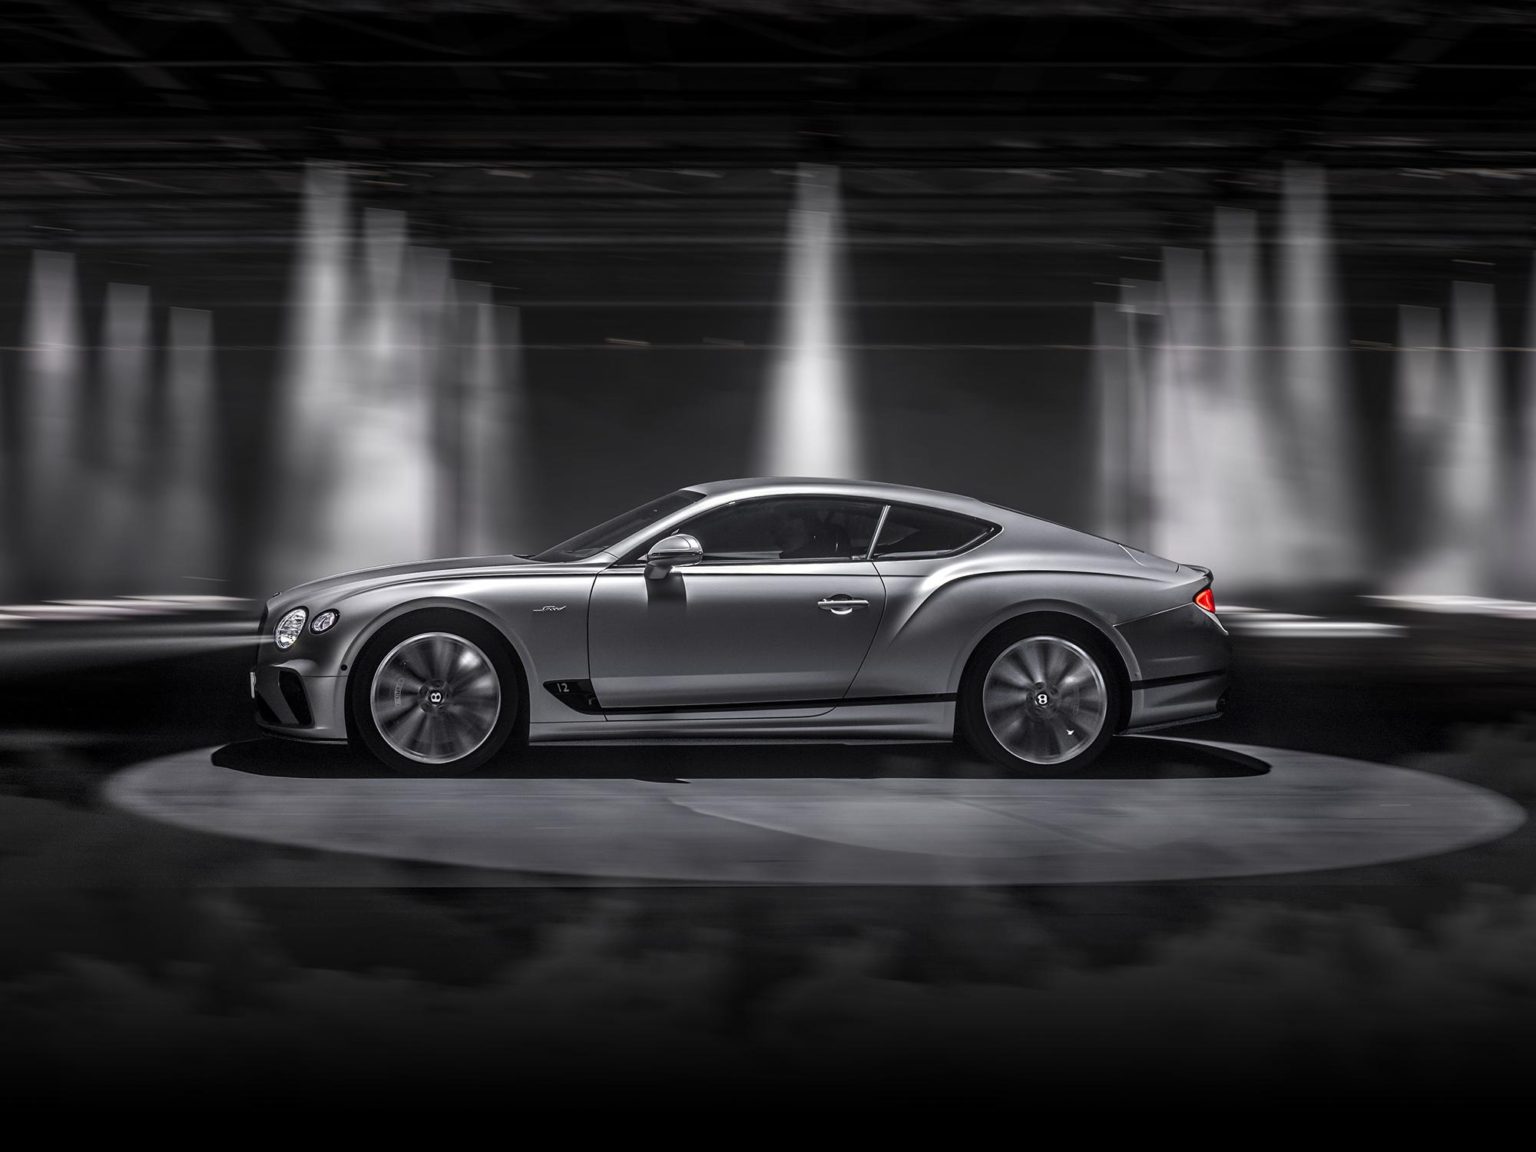 The newest member of the Bentley Continental GT family was introduced this week.